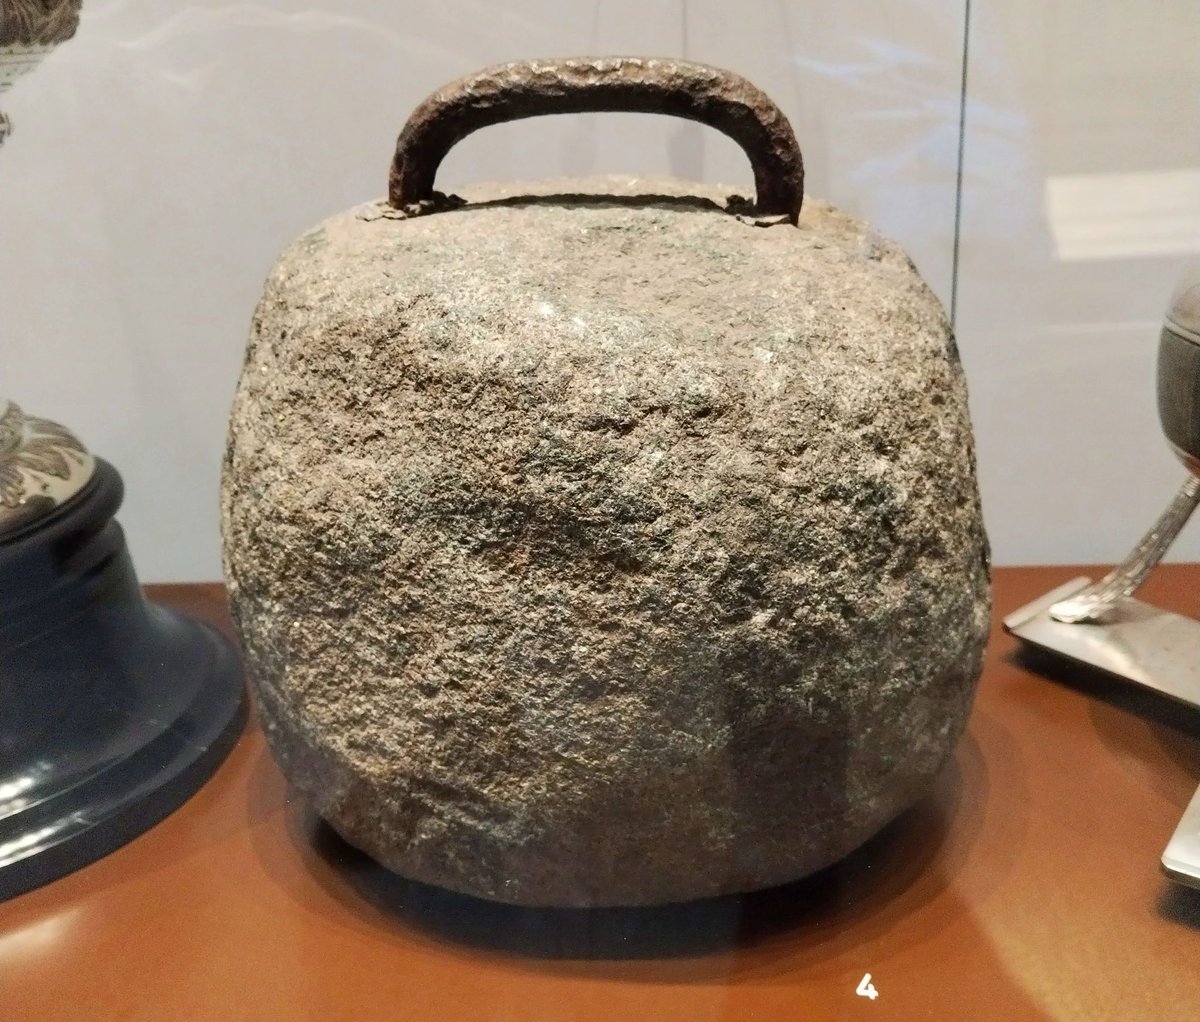 This 66lbs curling stone, 'Black Meg', was previously owned by the Coupar Angus and Kettins Curling Club. Tracing its origins to 1749, the club is one of the oldest in Scotland. Possibly imported by Dutch merchants, curling is likely to have become popular from the 16th century.